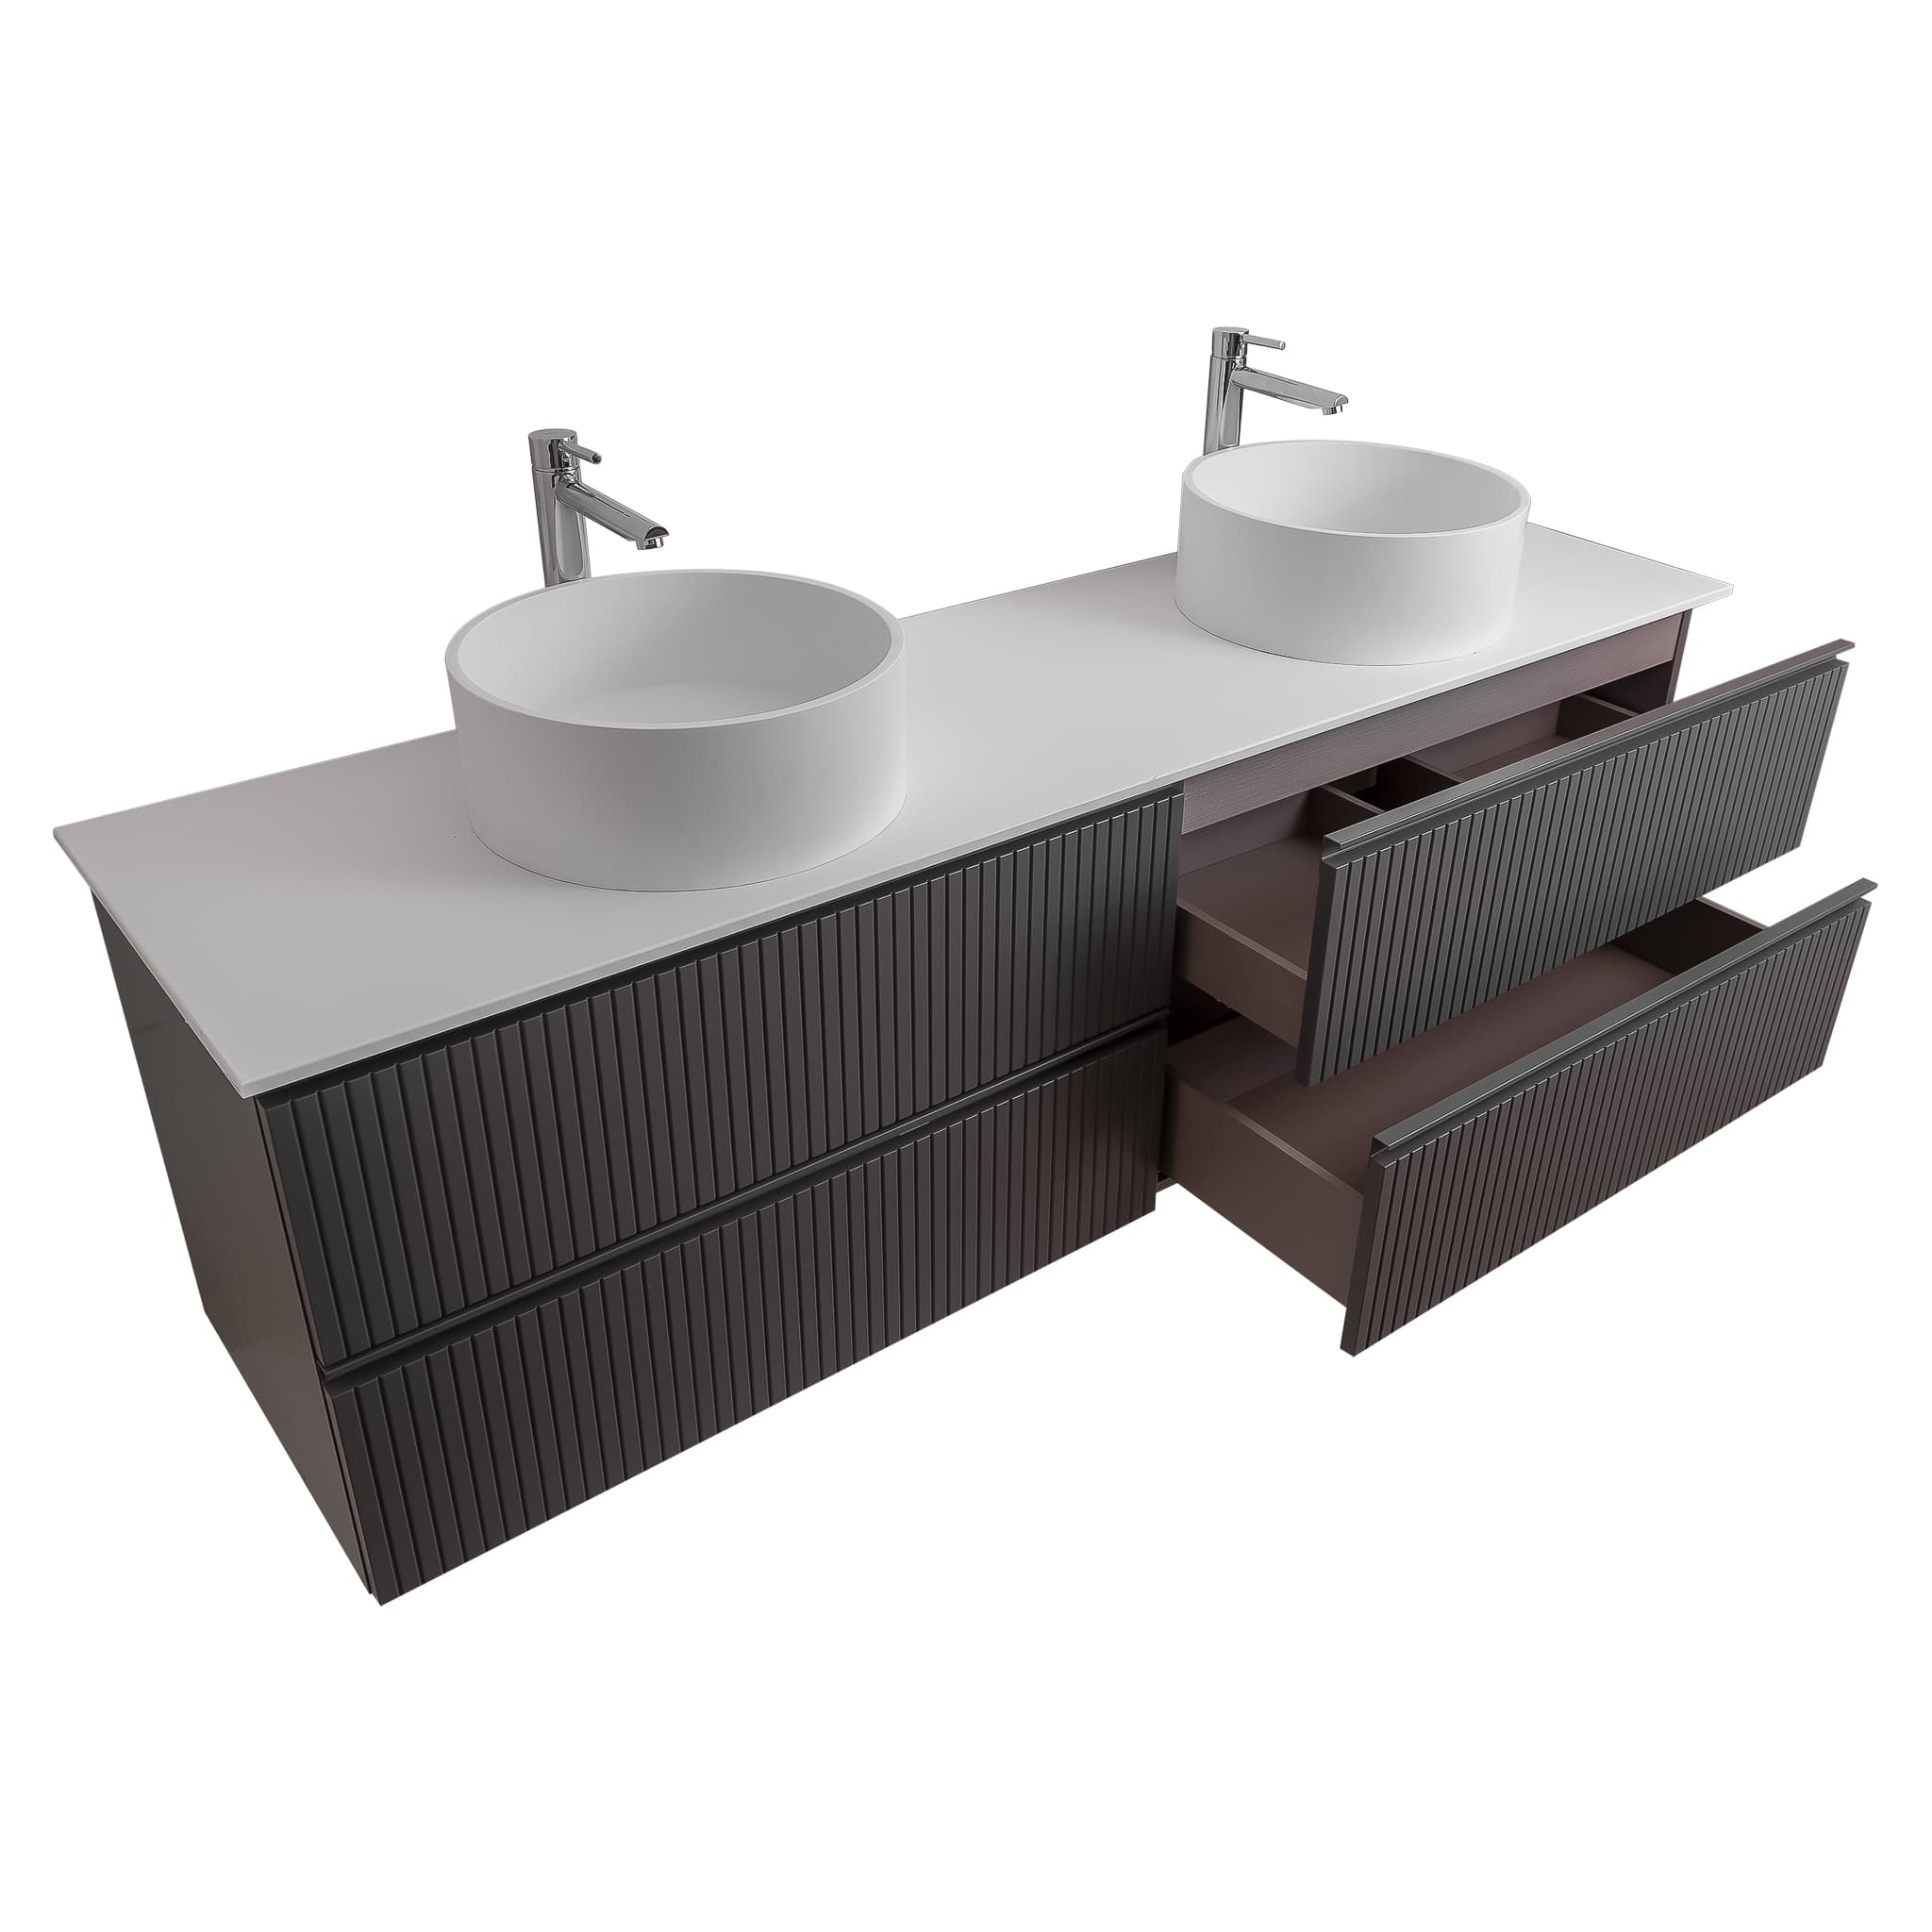 Ares 63 Matte Grey Cabinet, Solid Surface Flat White Counter And Two Round Solid Surface White Basin 1386, Wall Mounted Modern Vanity Set